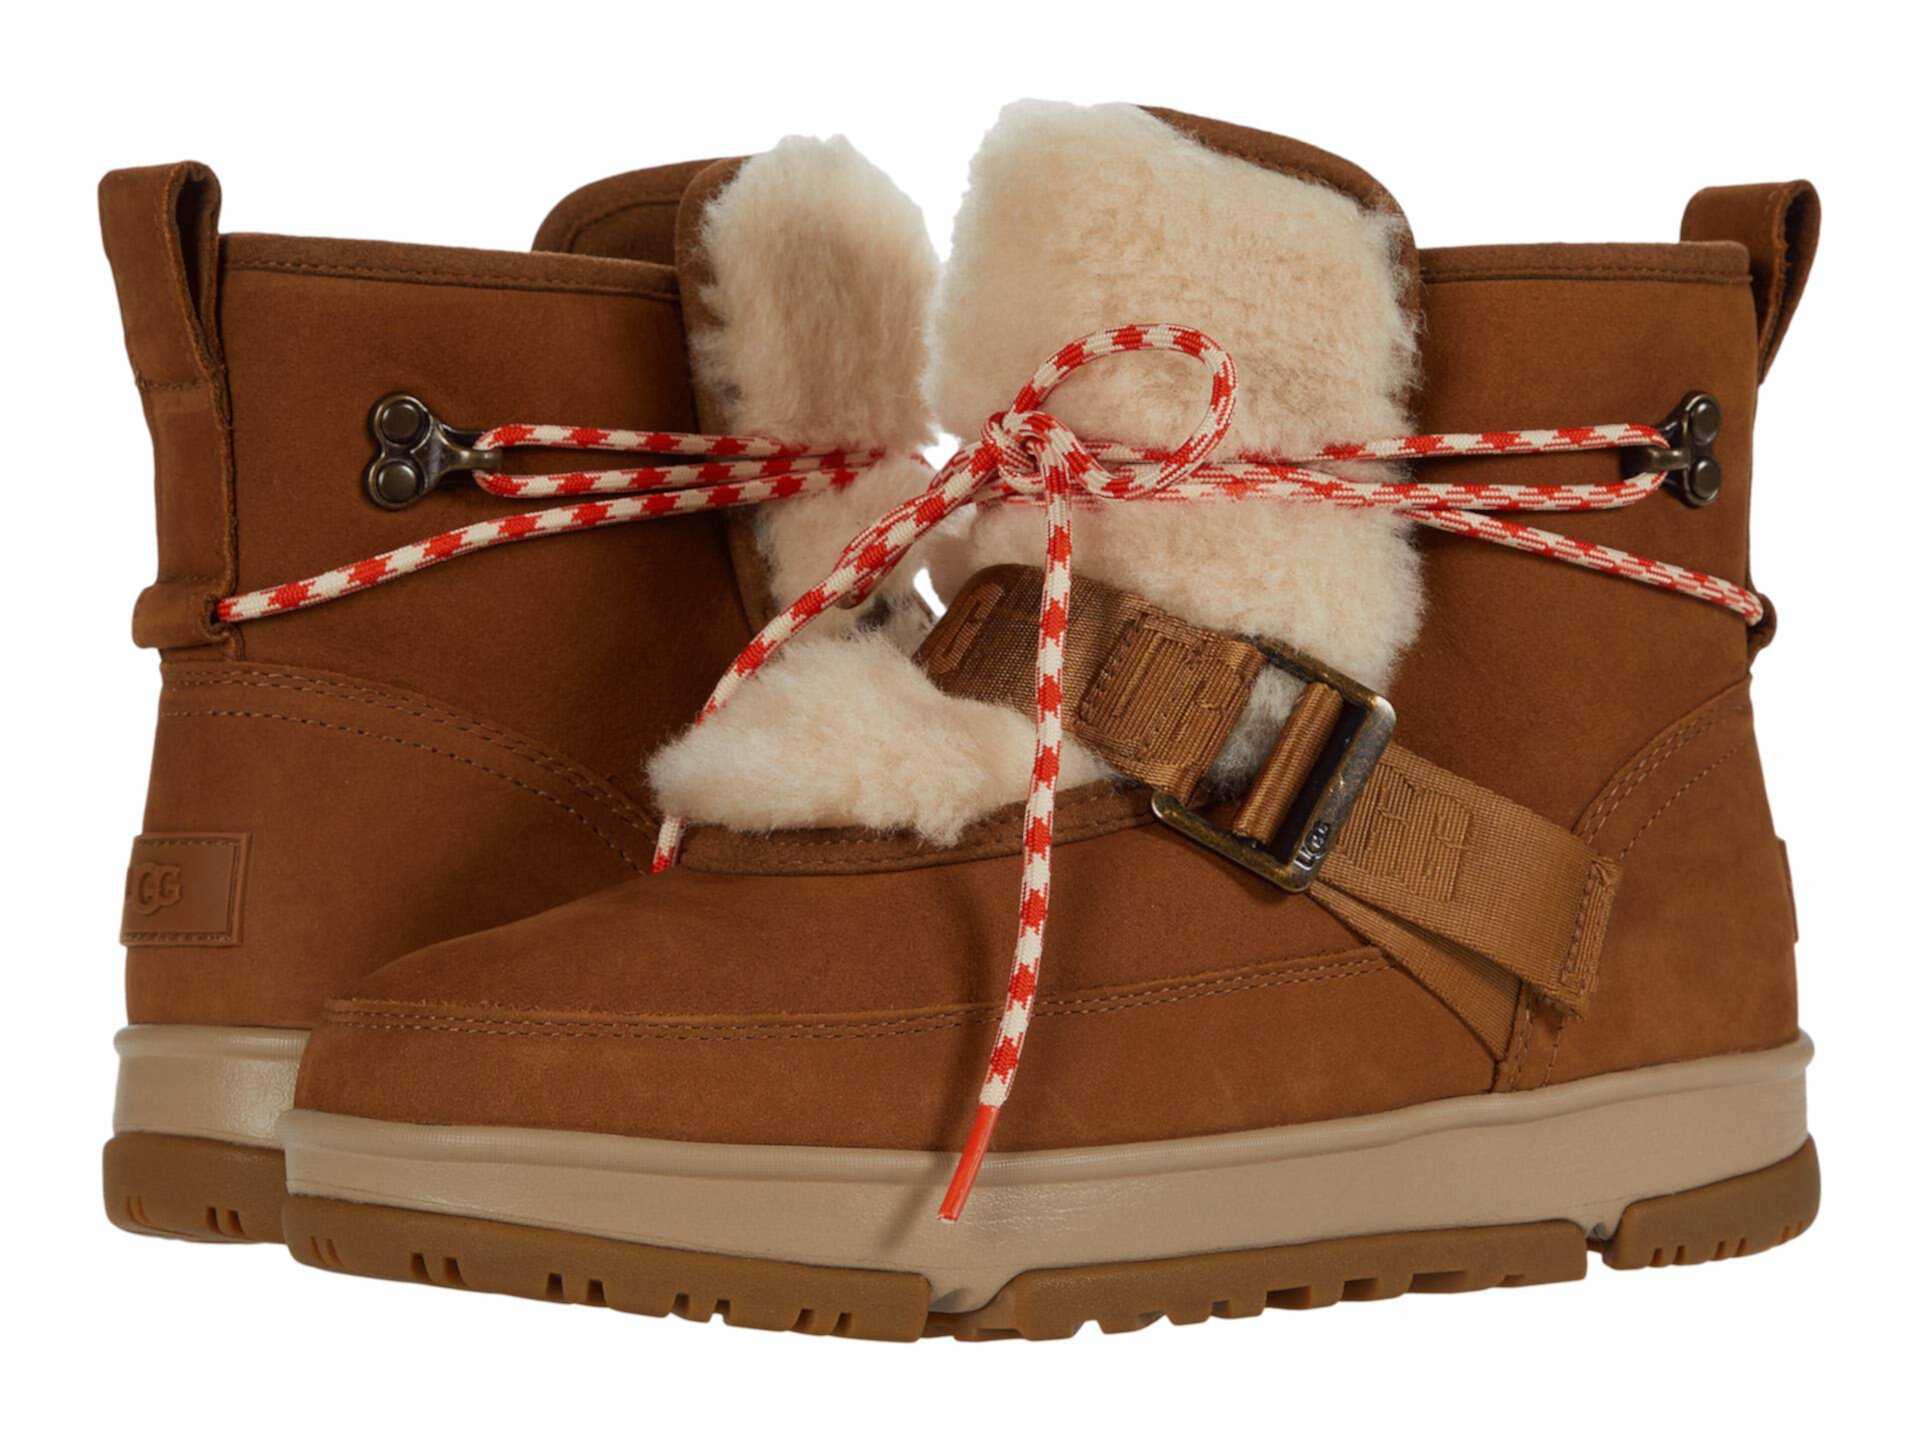 Classic Weather Hiker UGG